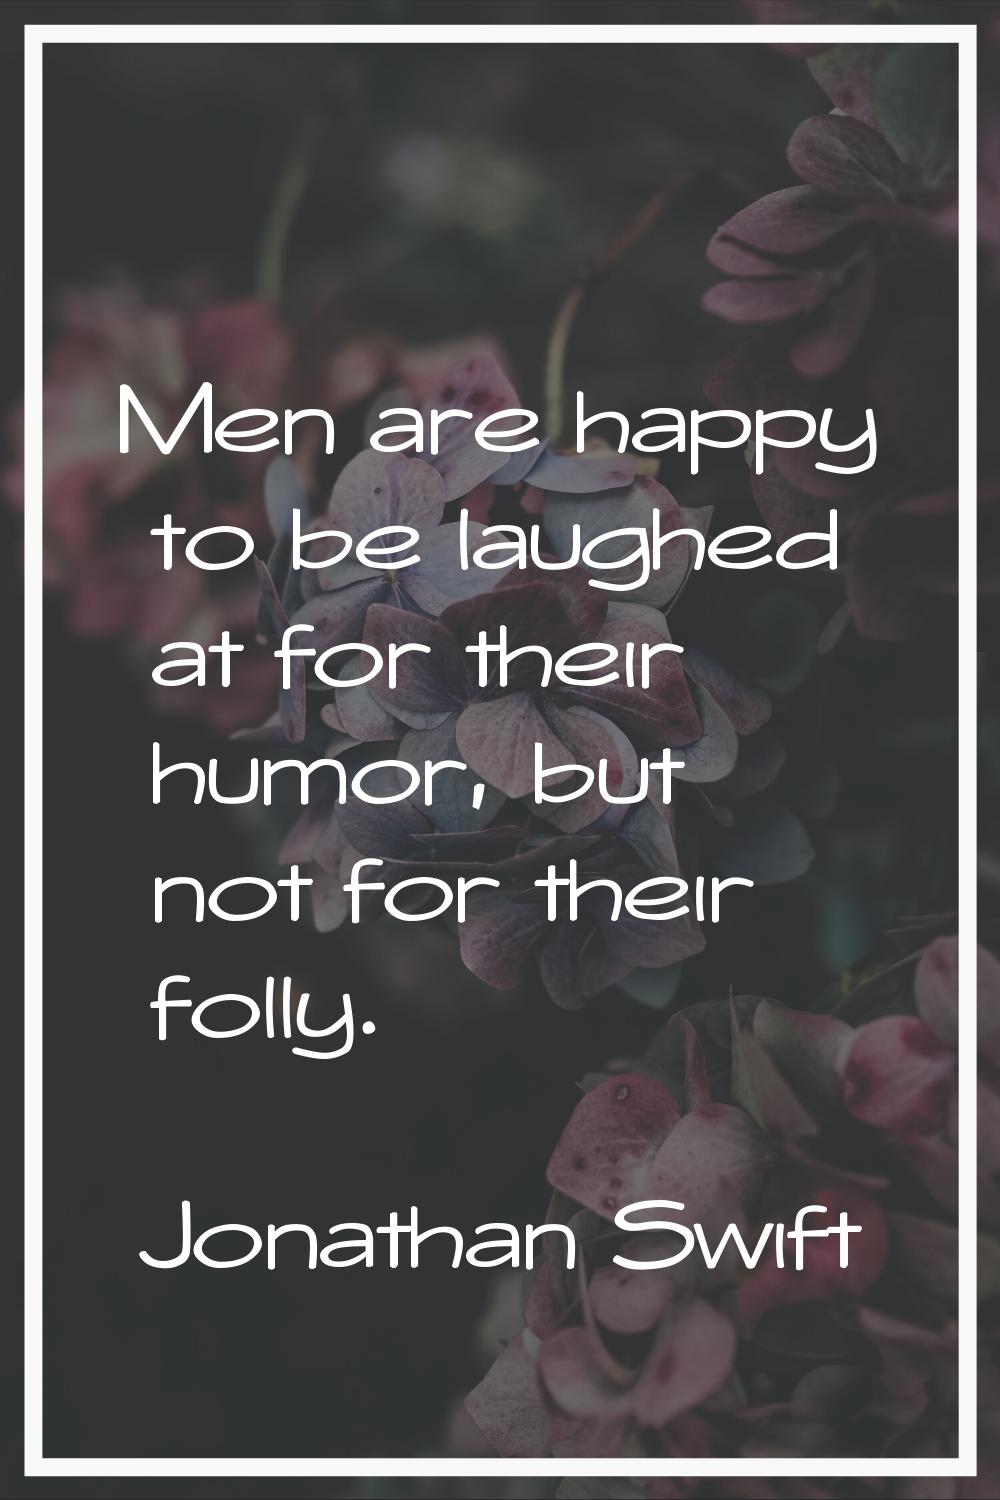 Men are happy to be laughed at for their humor, but not for their folly.